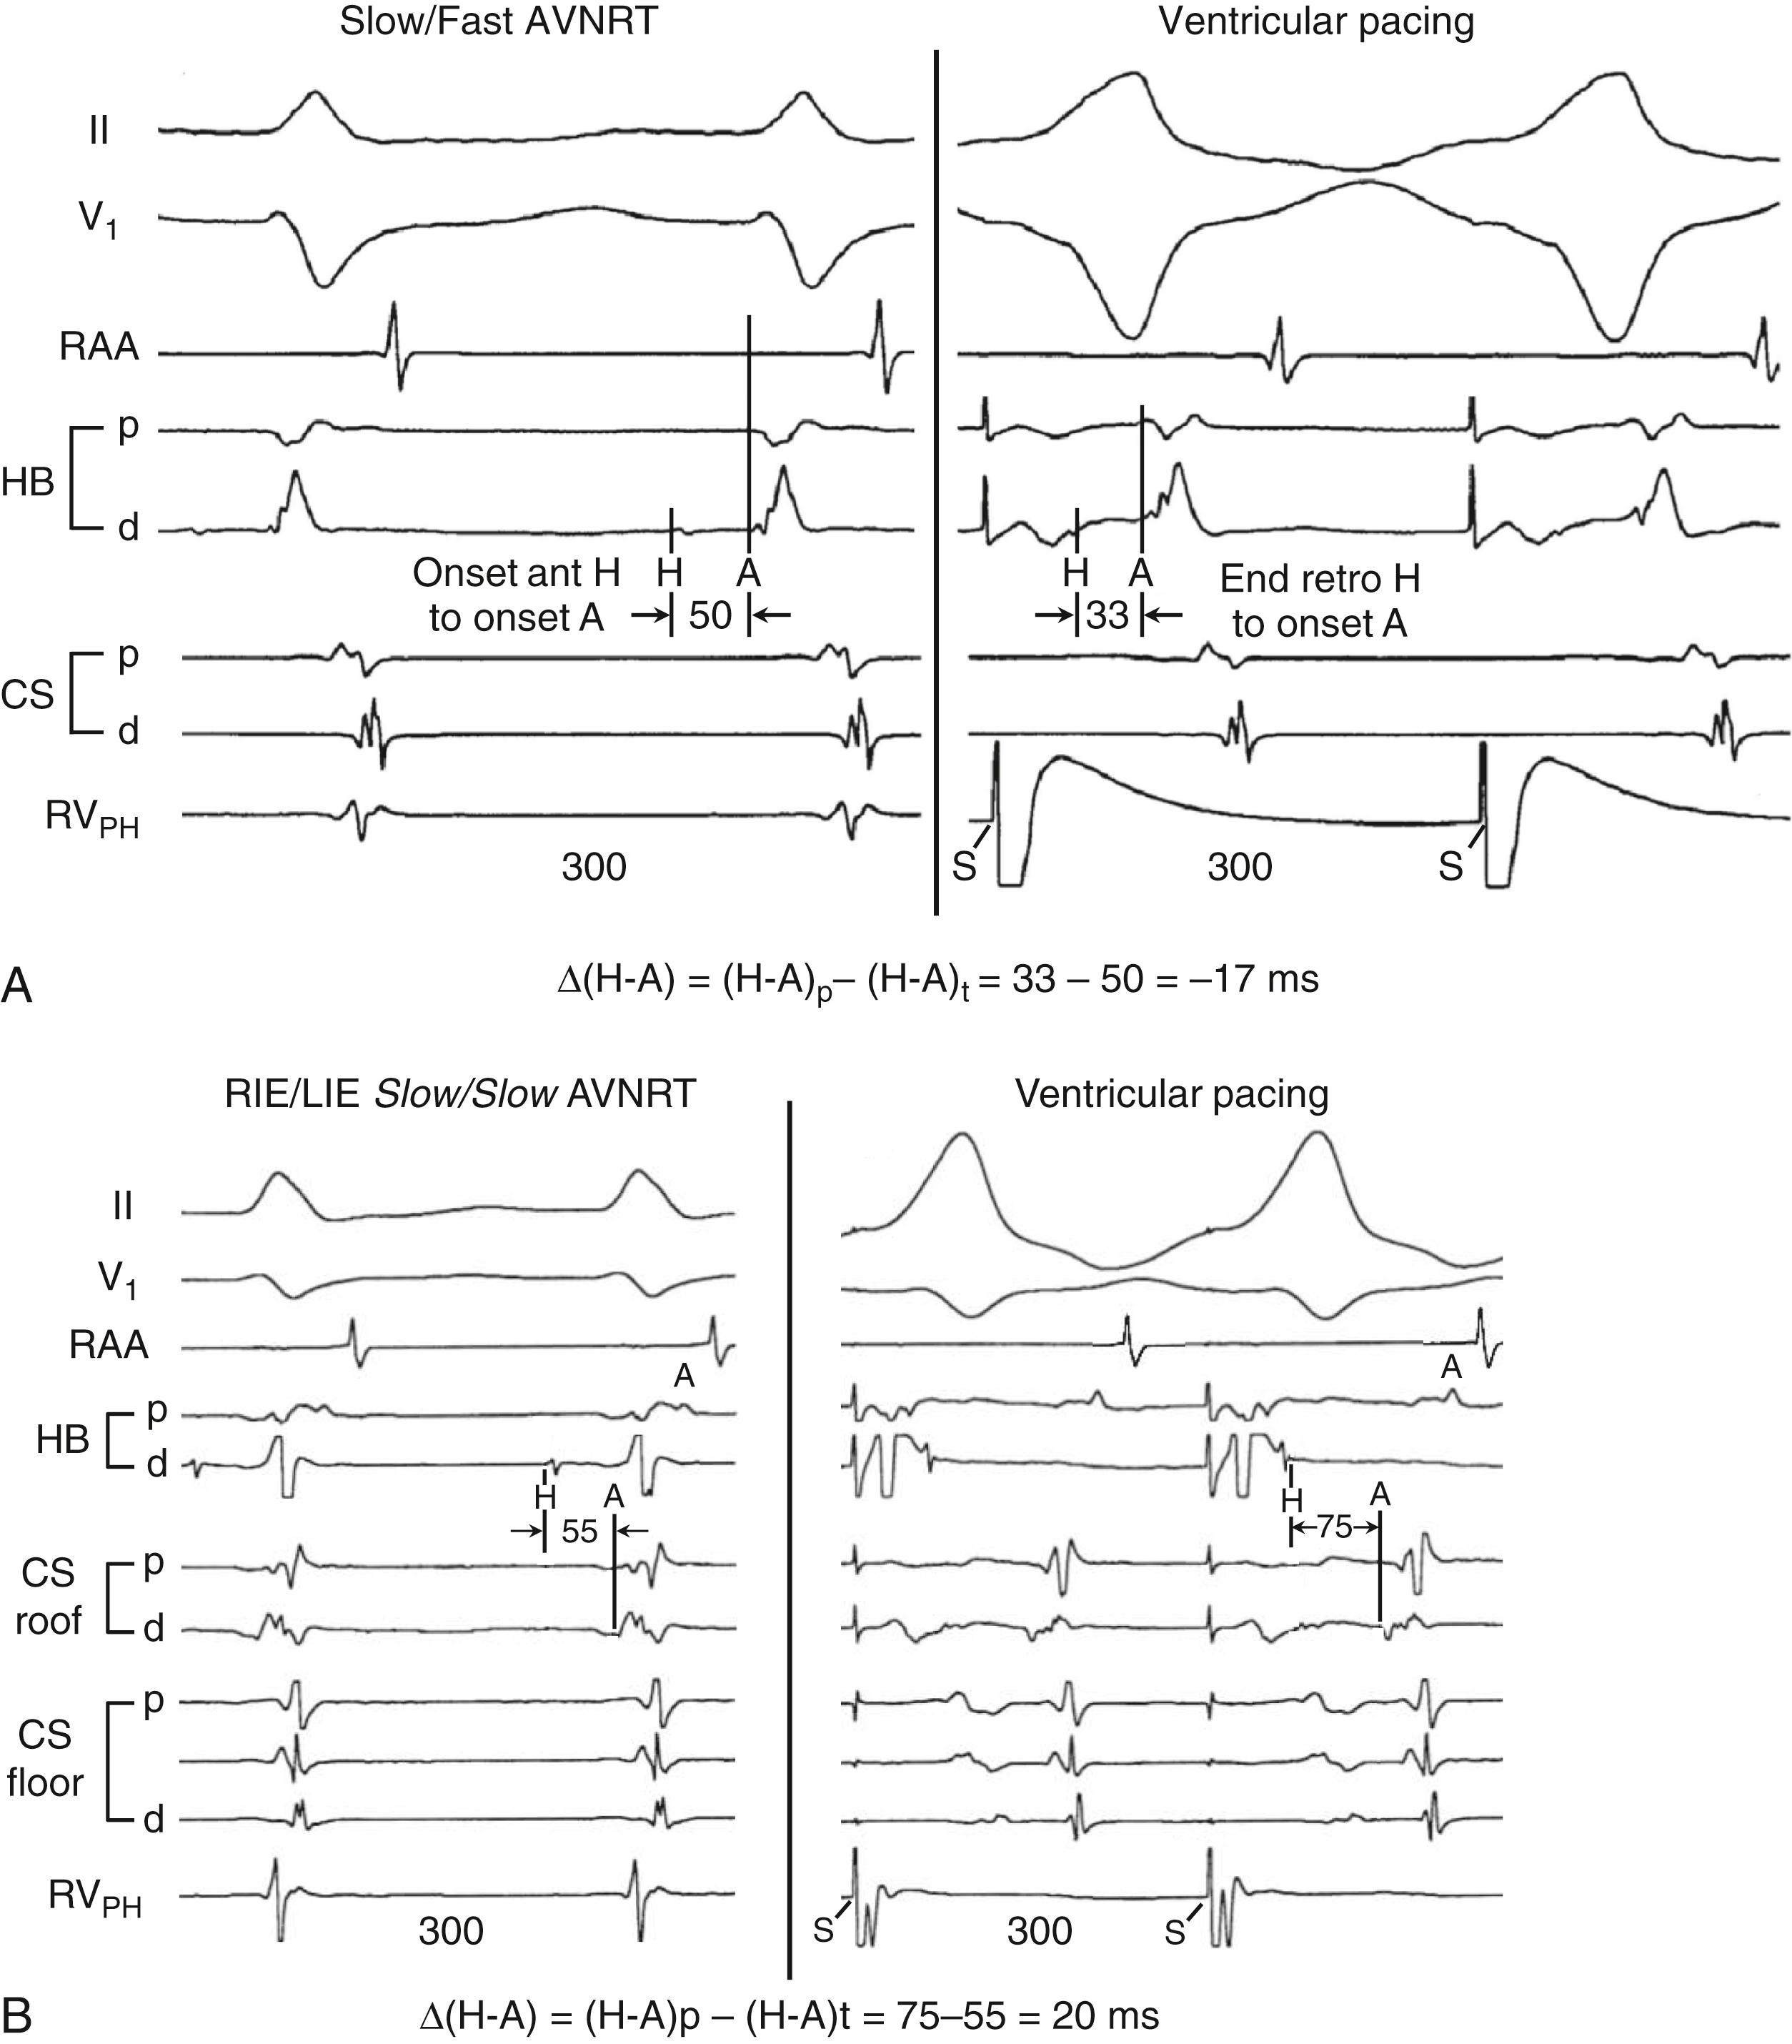 Fig. 72.11, Comparison of the H-A interval during tachycardia and during ventricular pacing for Slow/Fast atrioventricular nodal reentrant tachycardia (AVNRT) and Slow/Slow (rightward inferior extension [RIE]/leftward inferior extension [LIE]) AVNRT.